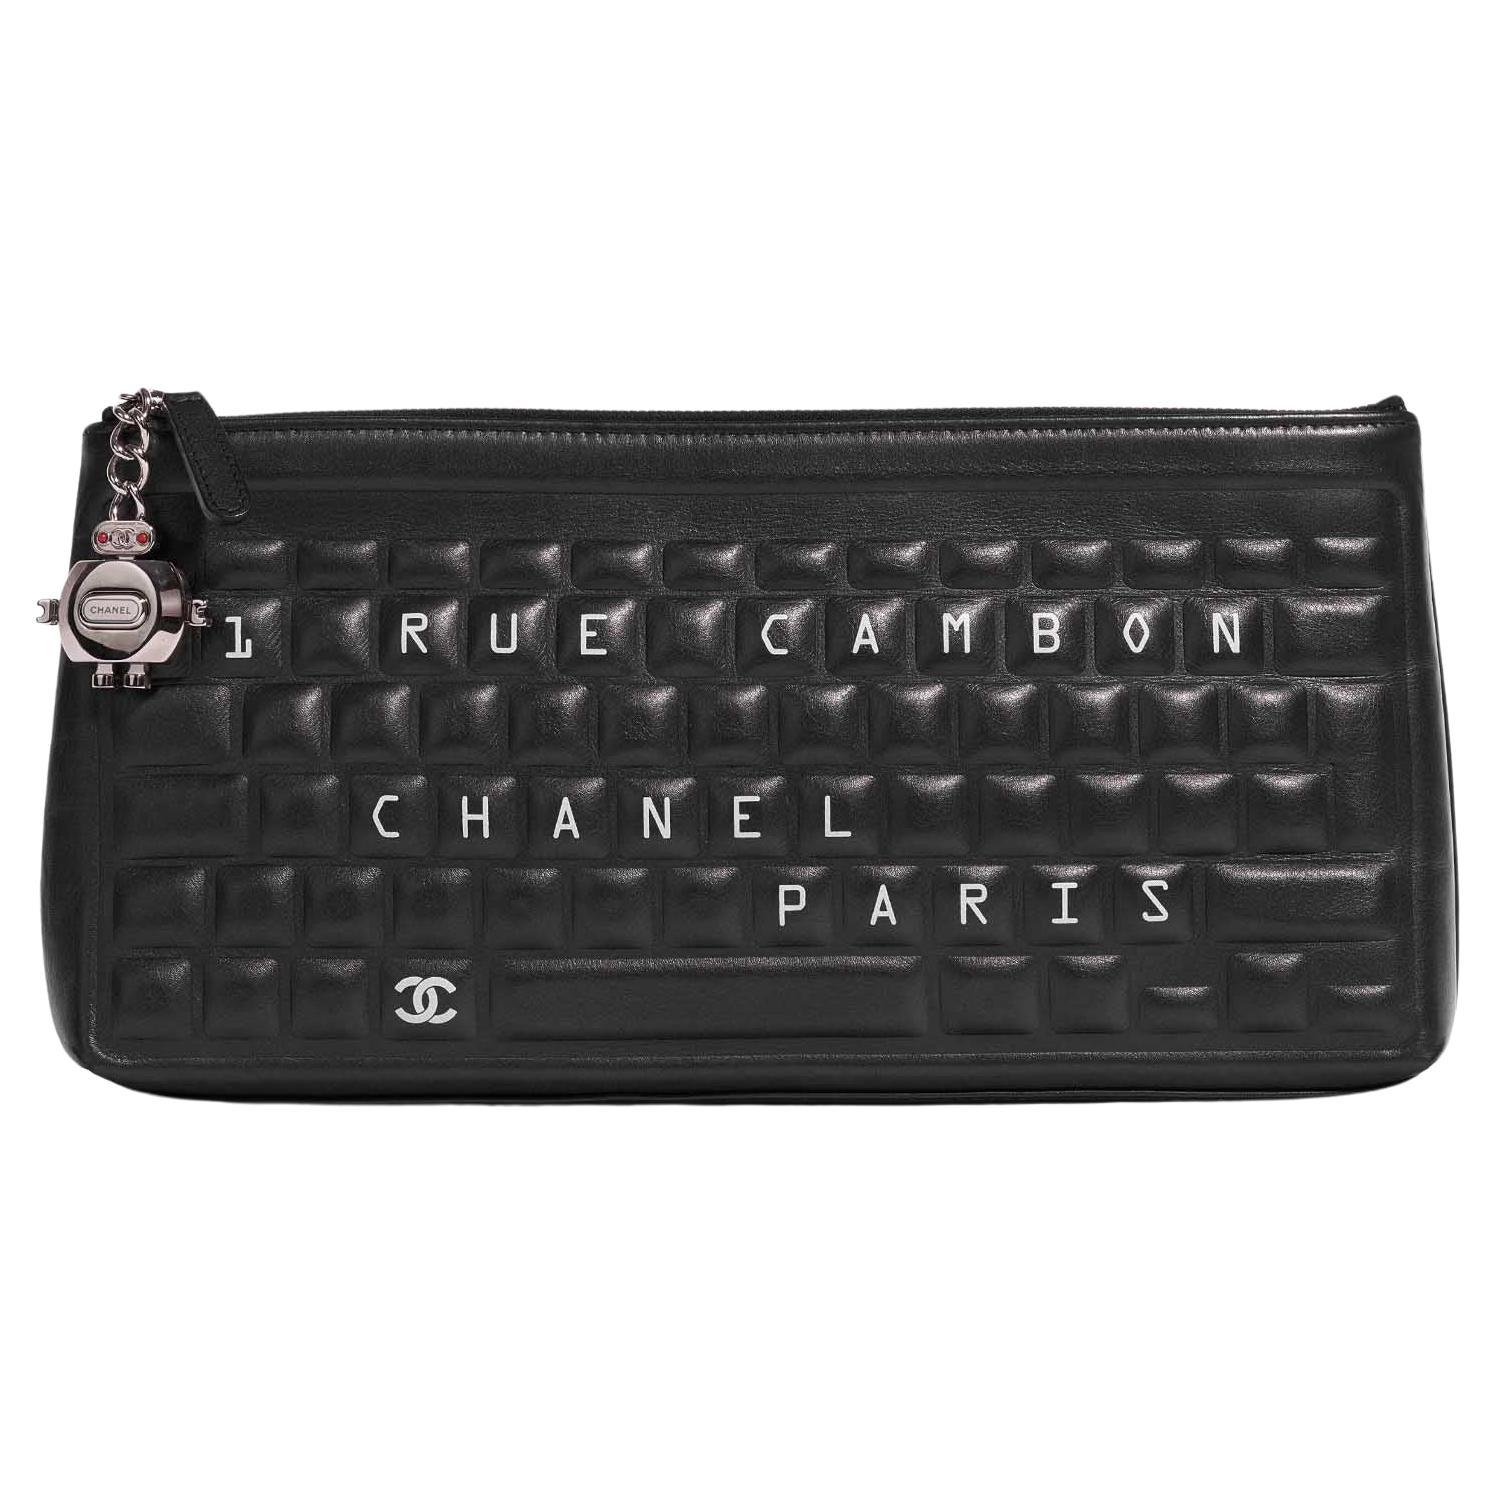 Chanel Iconic Novelty Keyboard Black Lambskin Clutch Minaudière   In Good Condition For Sale In Miami, FL